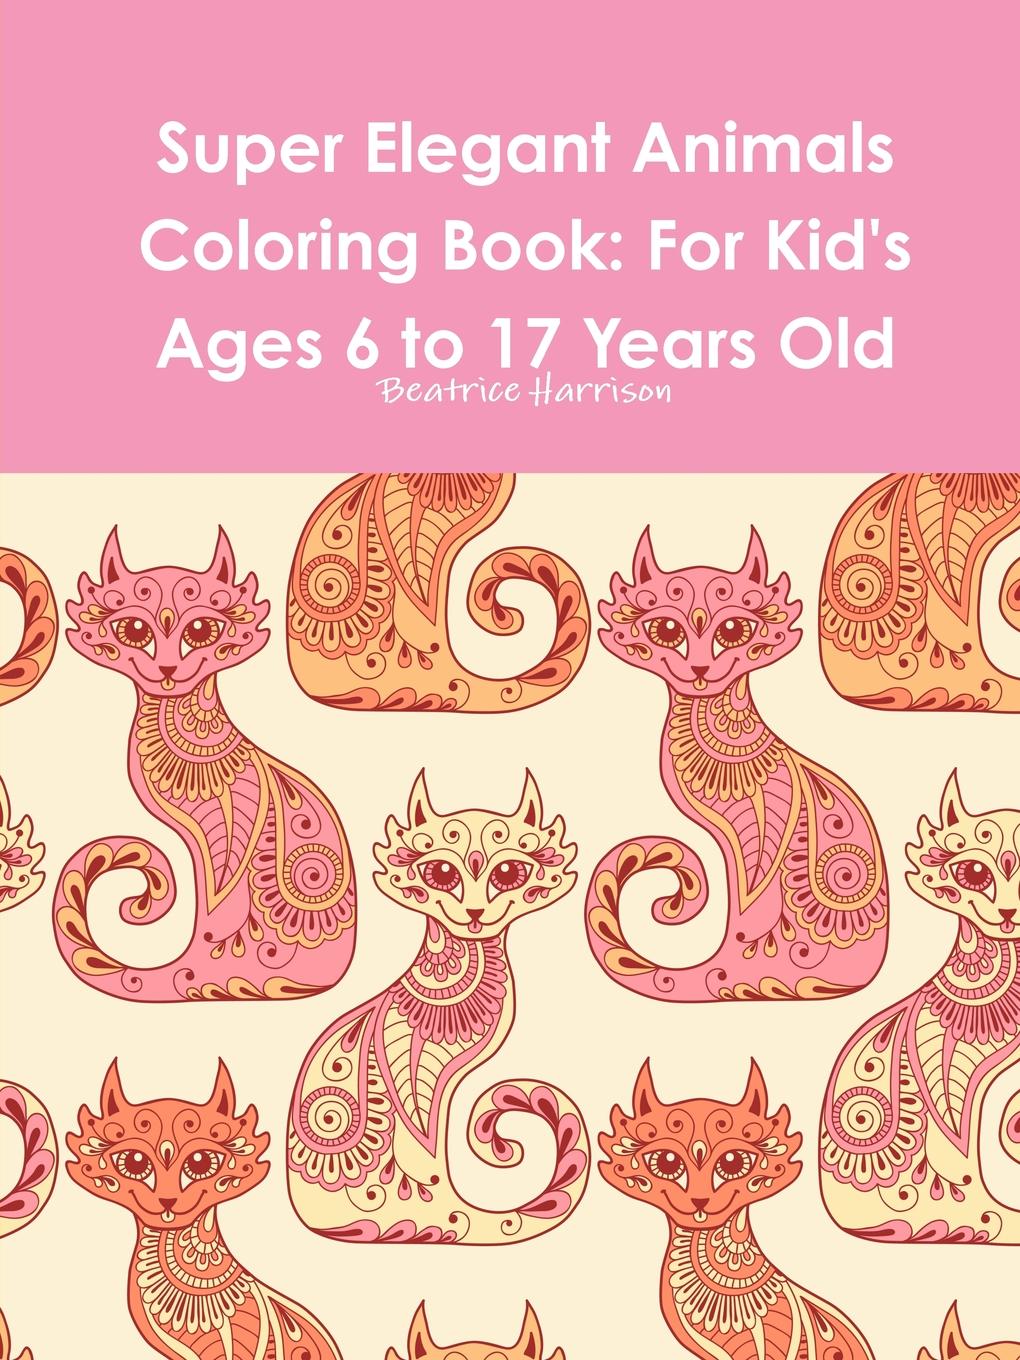 Beatrice Harrison Super Elegant Animals Coloring Book. For Kid.s Ages 6 to 17 Years Old